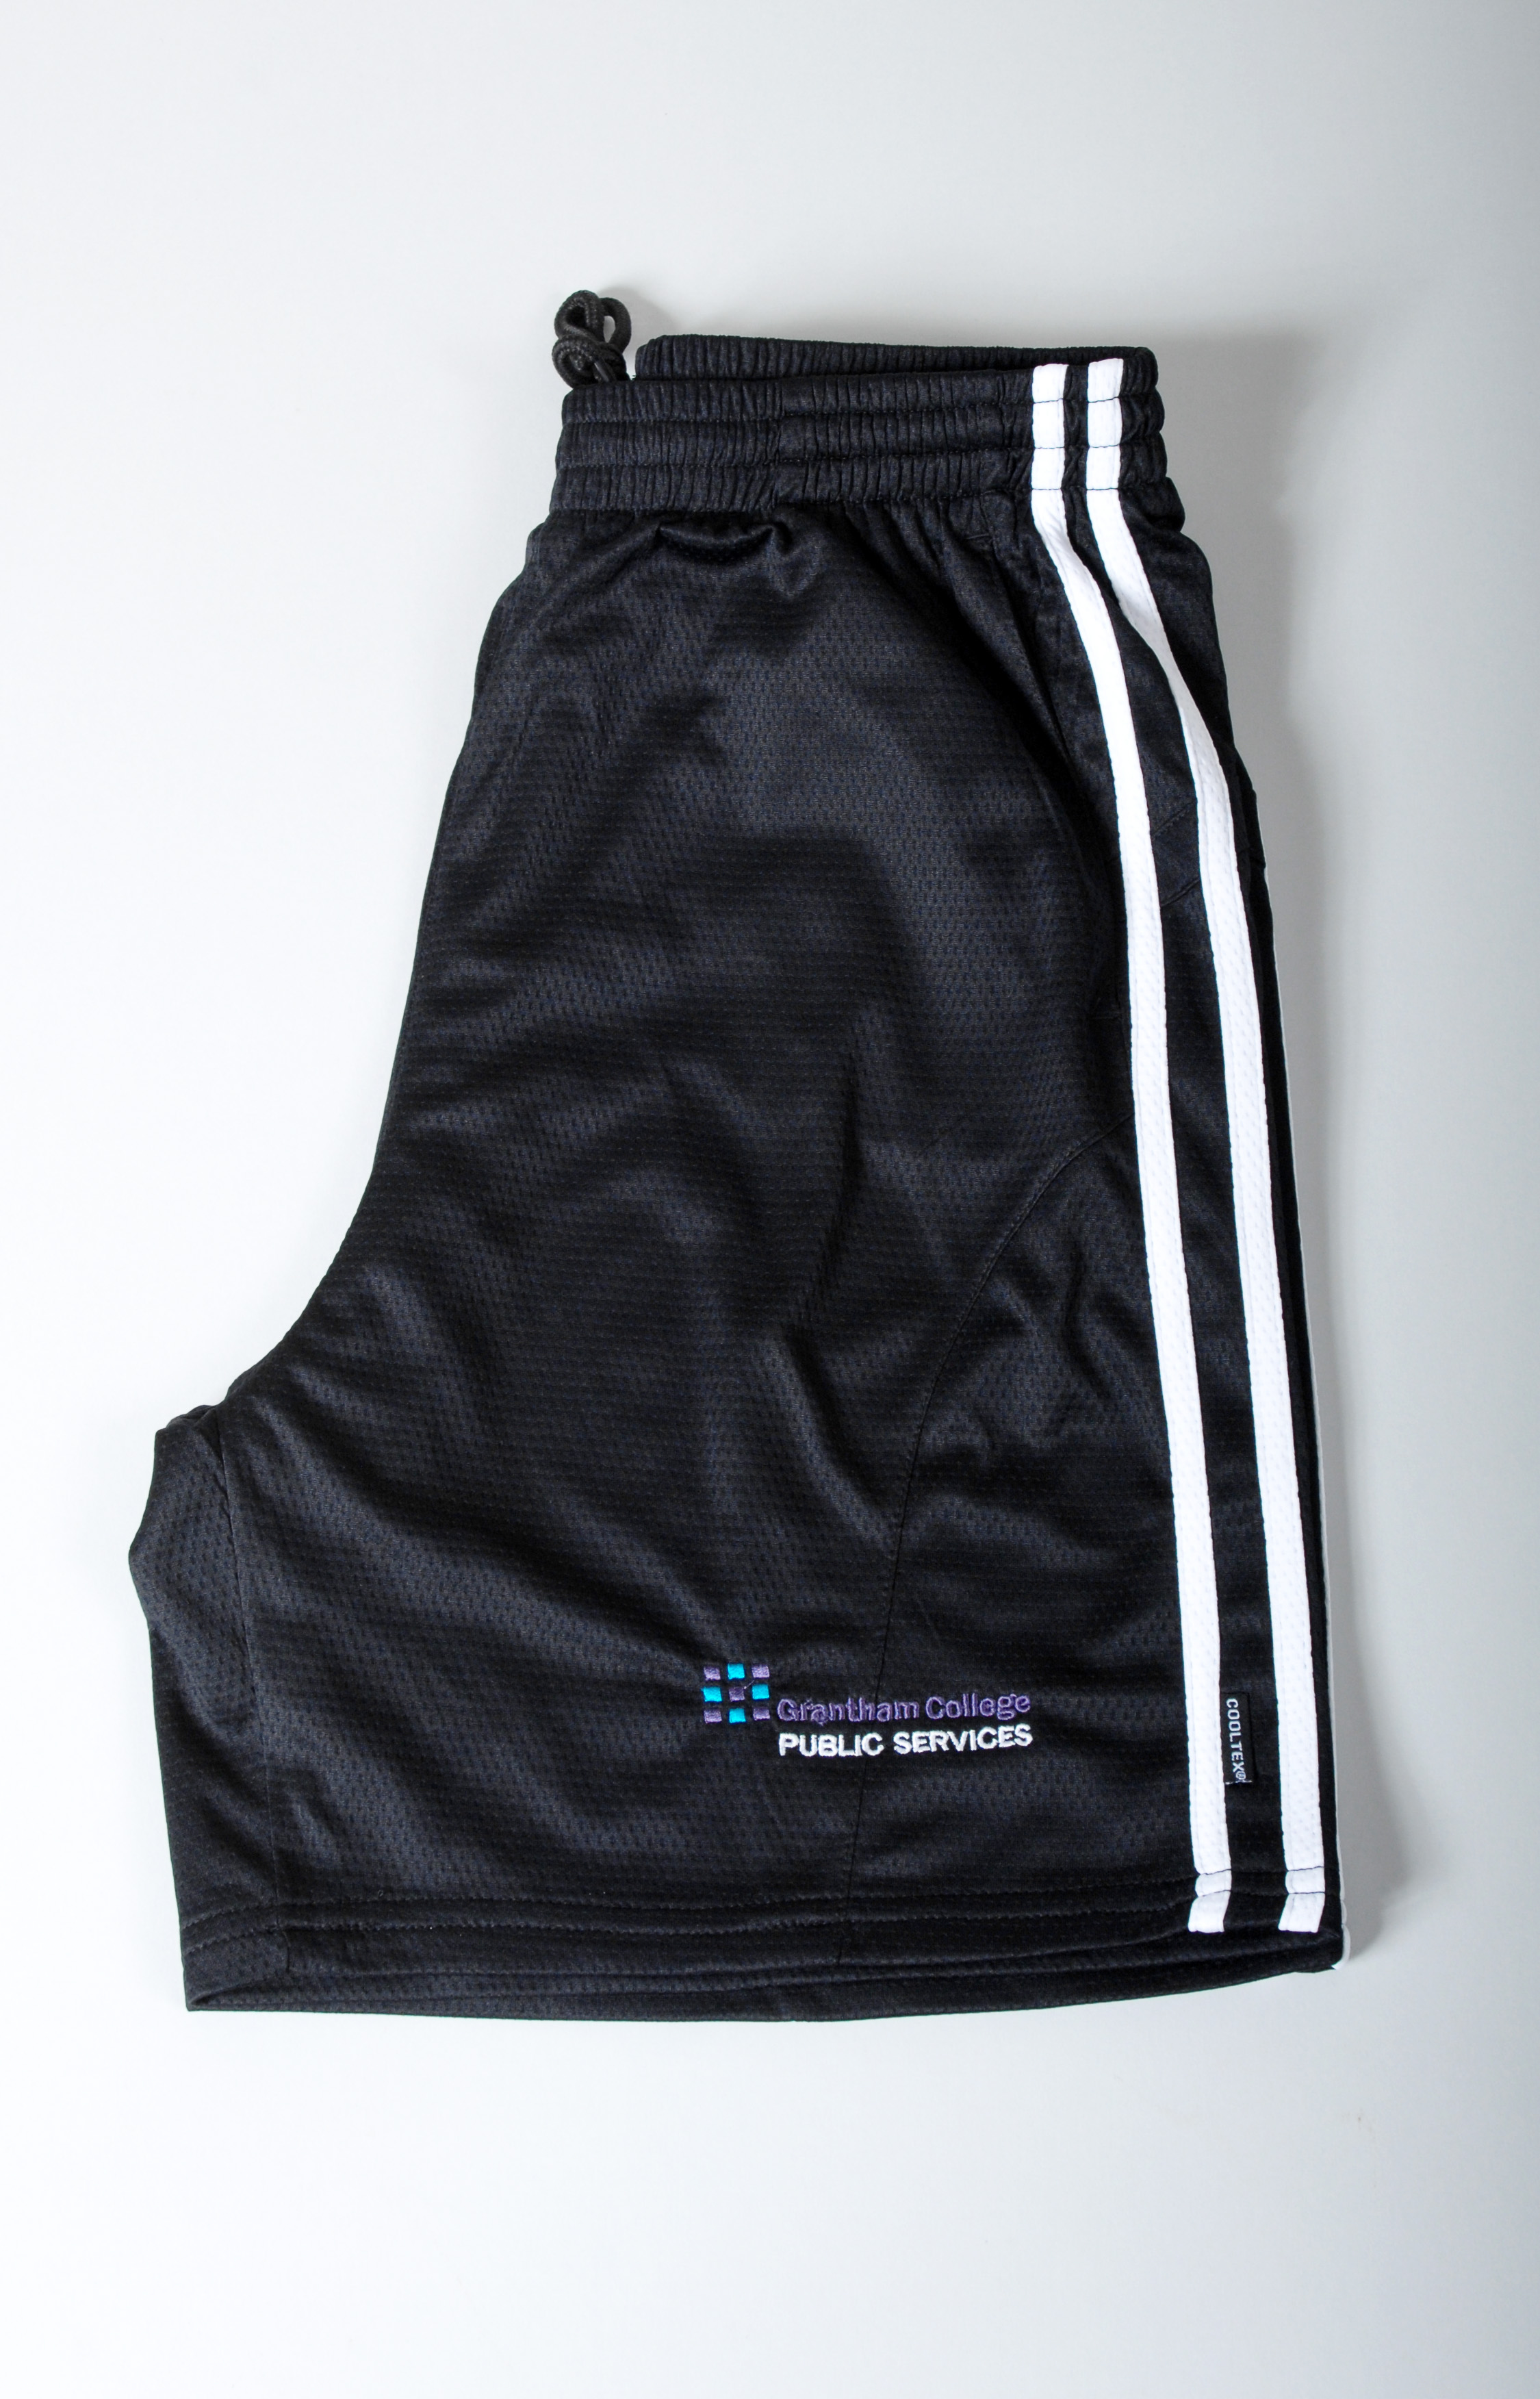 Black Cooltex Sports Shorts (Unisex Fit) - XS (to fit Waist 26-28")